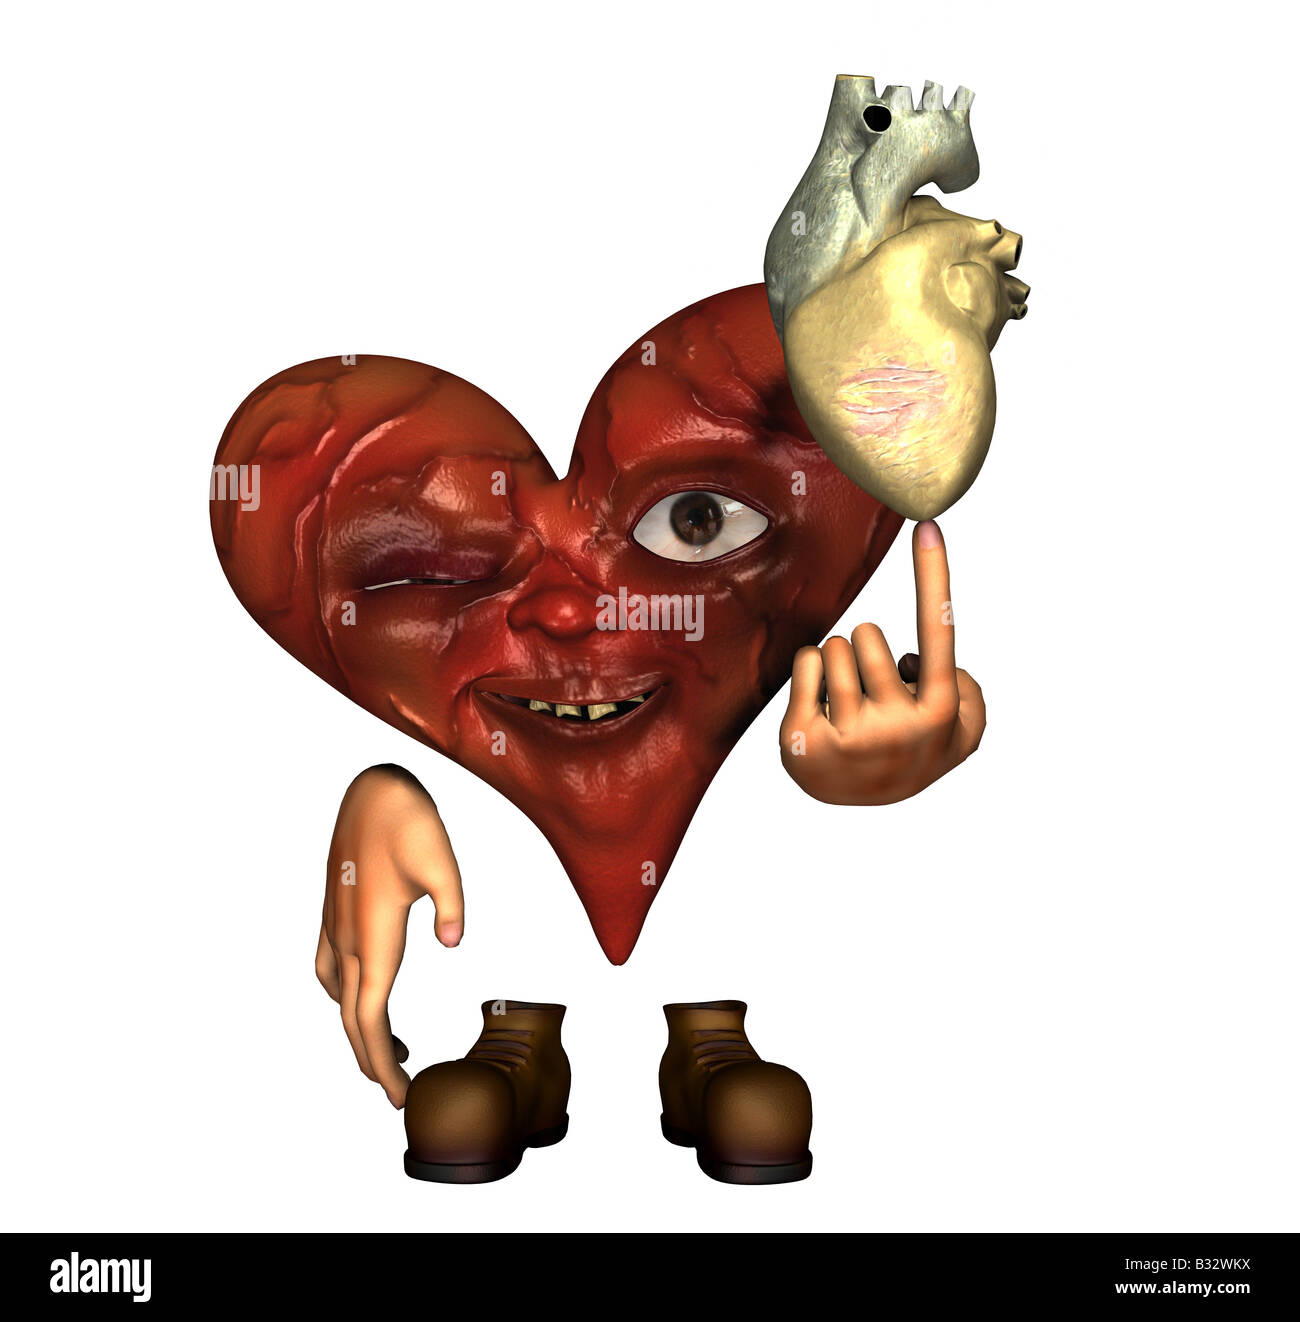 injured heart as symbol for heart attack Stock Photo